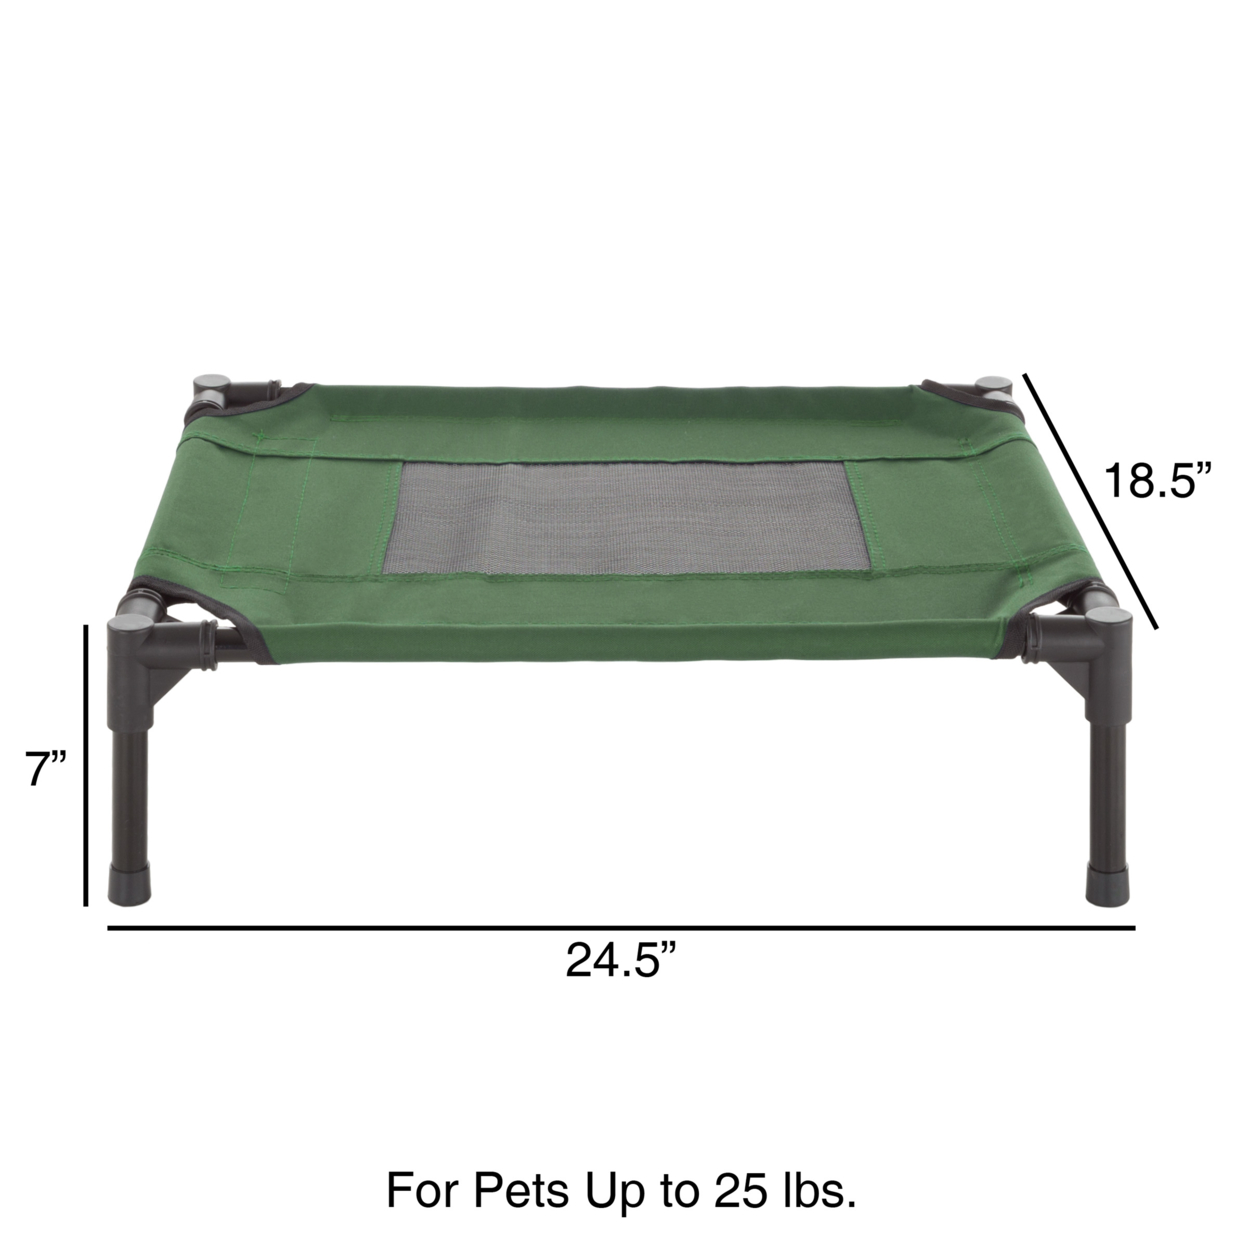 Elevated Pet Bed-Portable Raised Cot-Style Bed W/ Non-Slip Feet, 24.5x 18.5x 7 For Dogs Or Pets Green